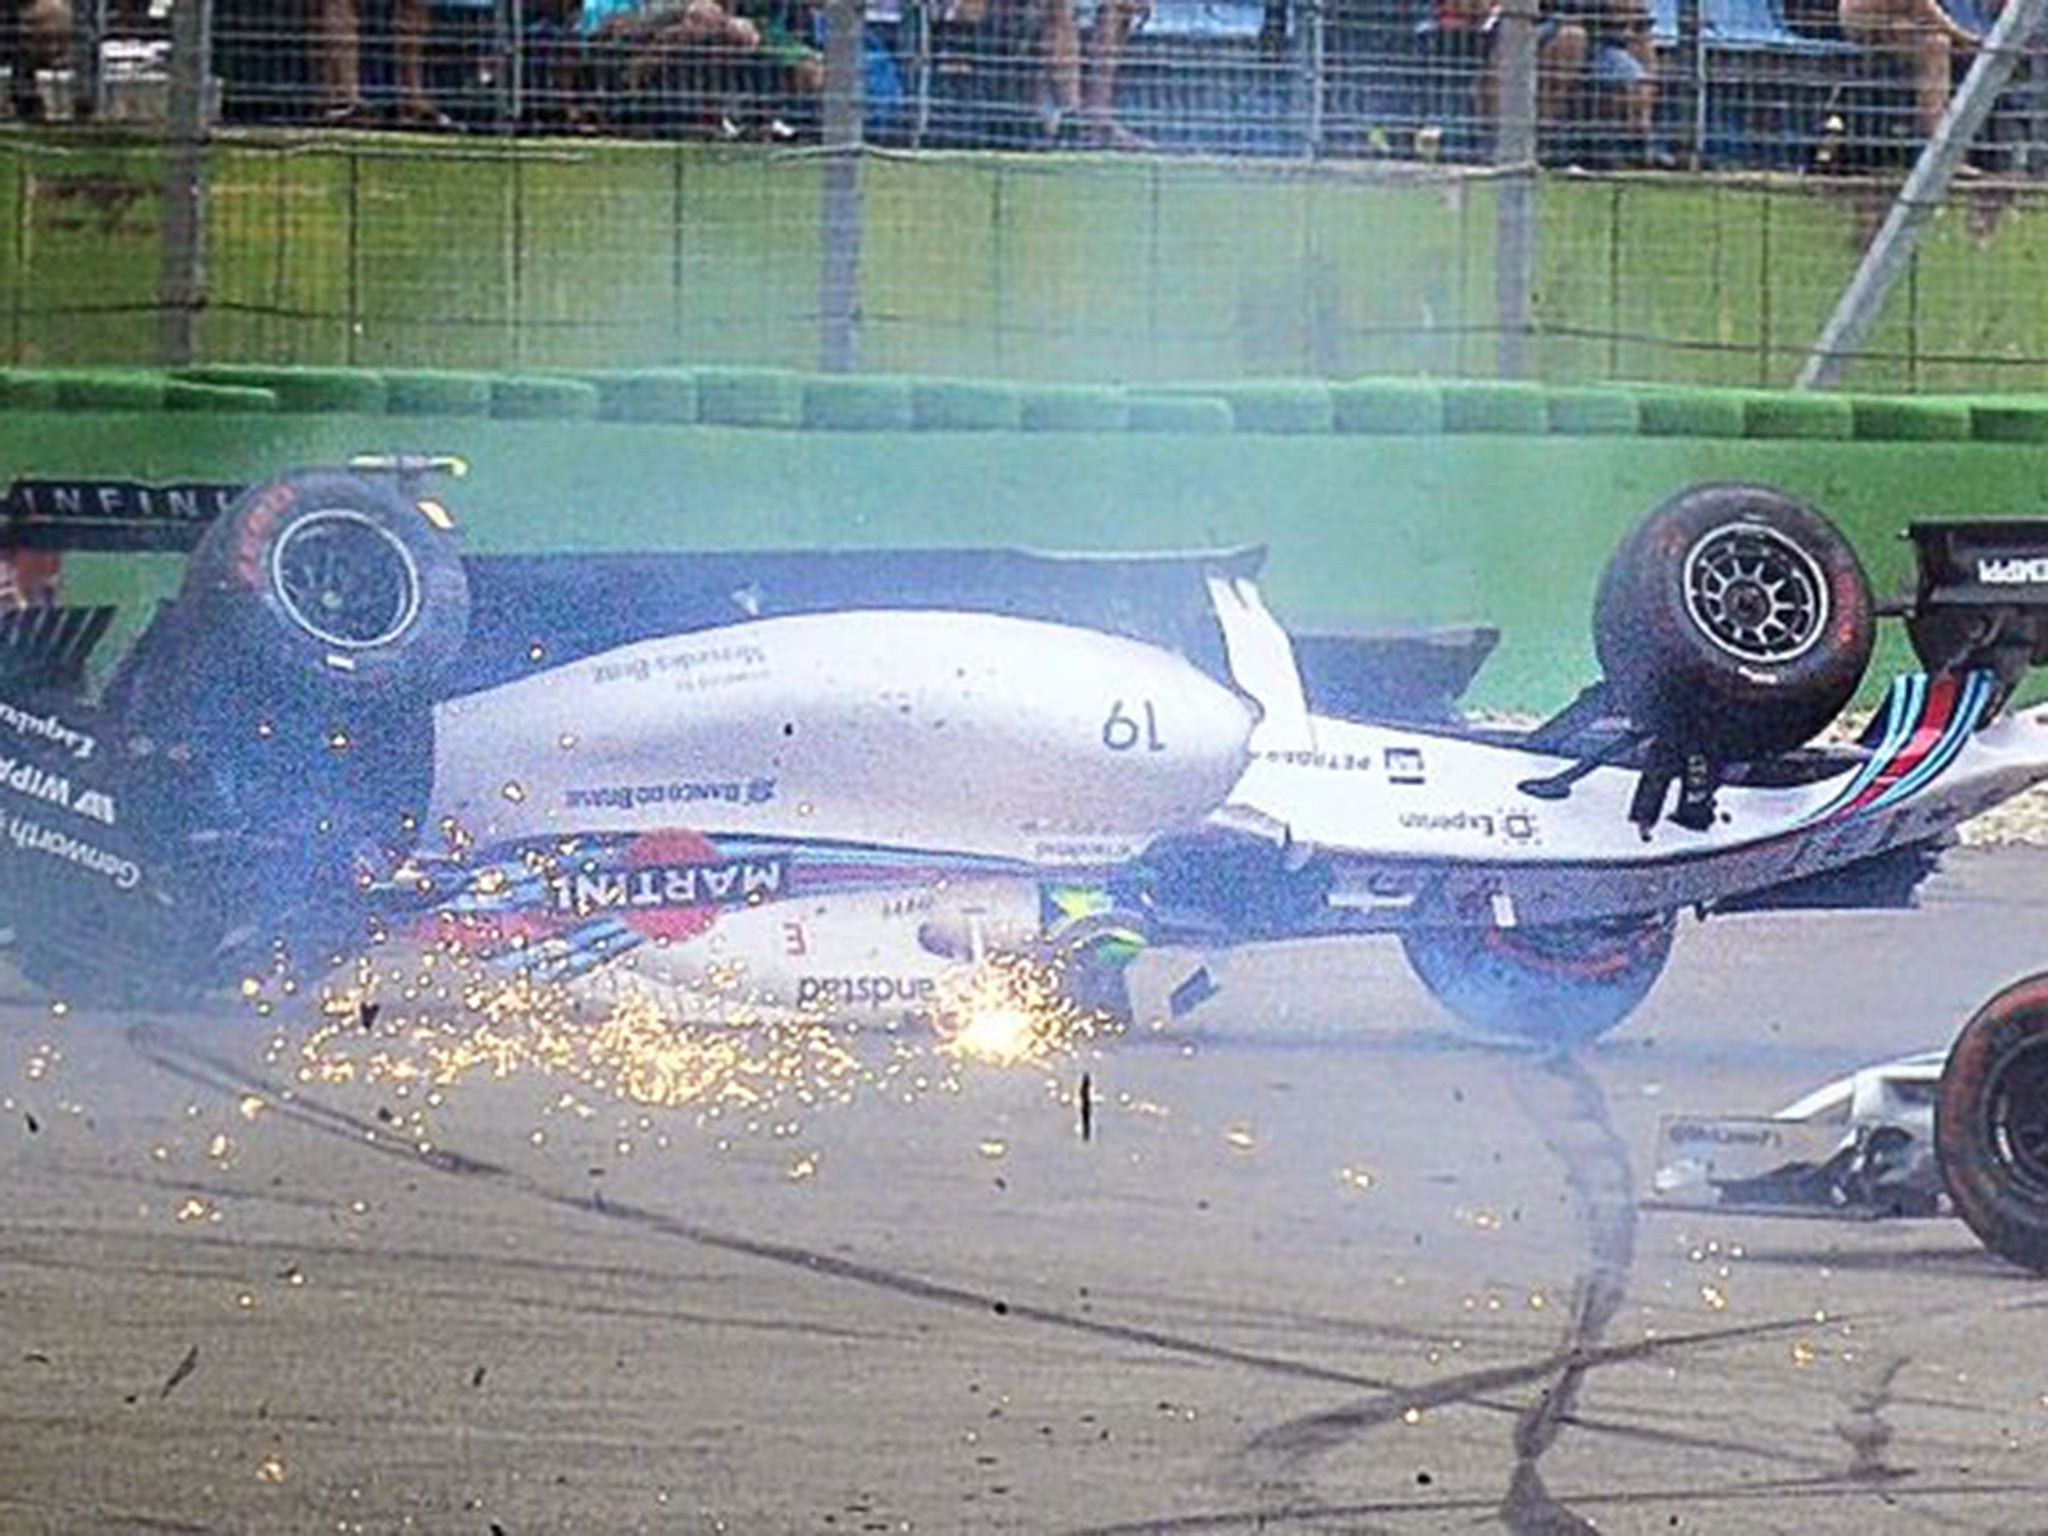 Felipe Massa’s Williams ends upside down after colliding with Kevin Magnussen’s McLaren at the first corner